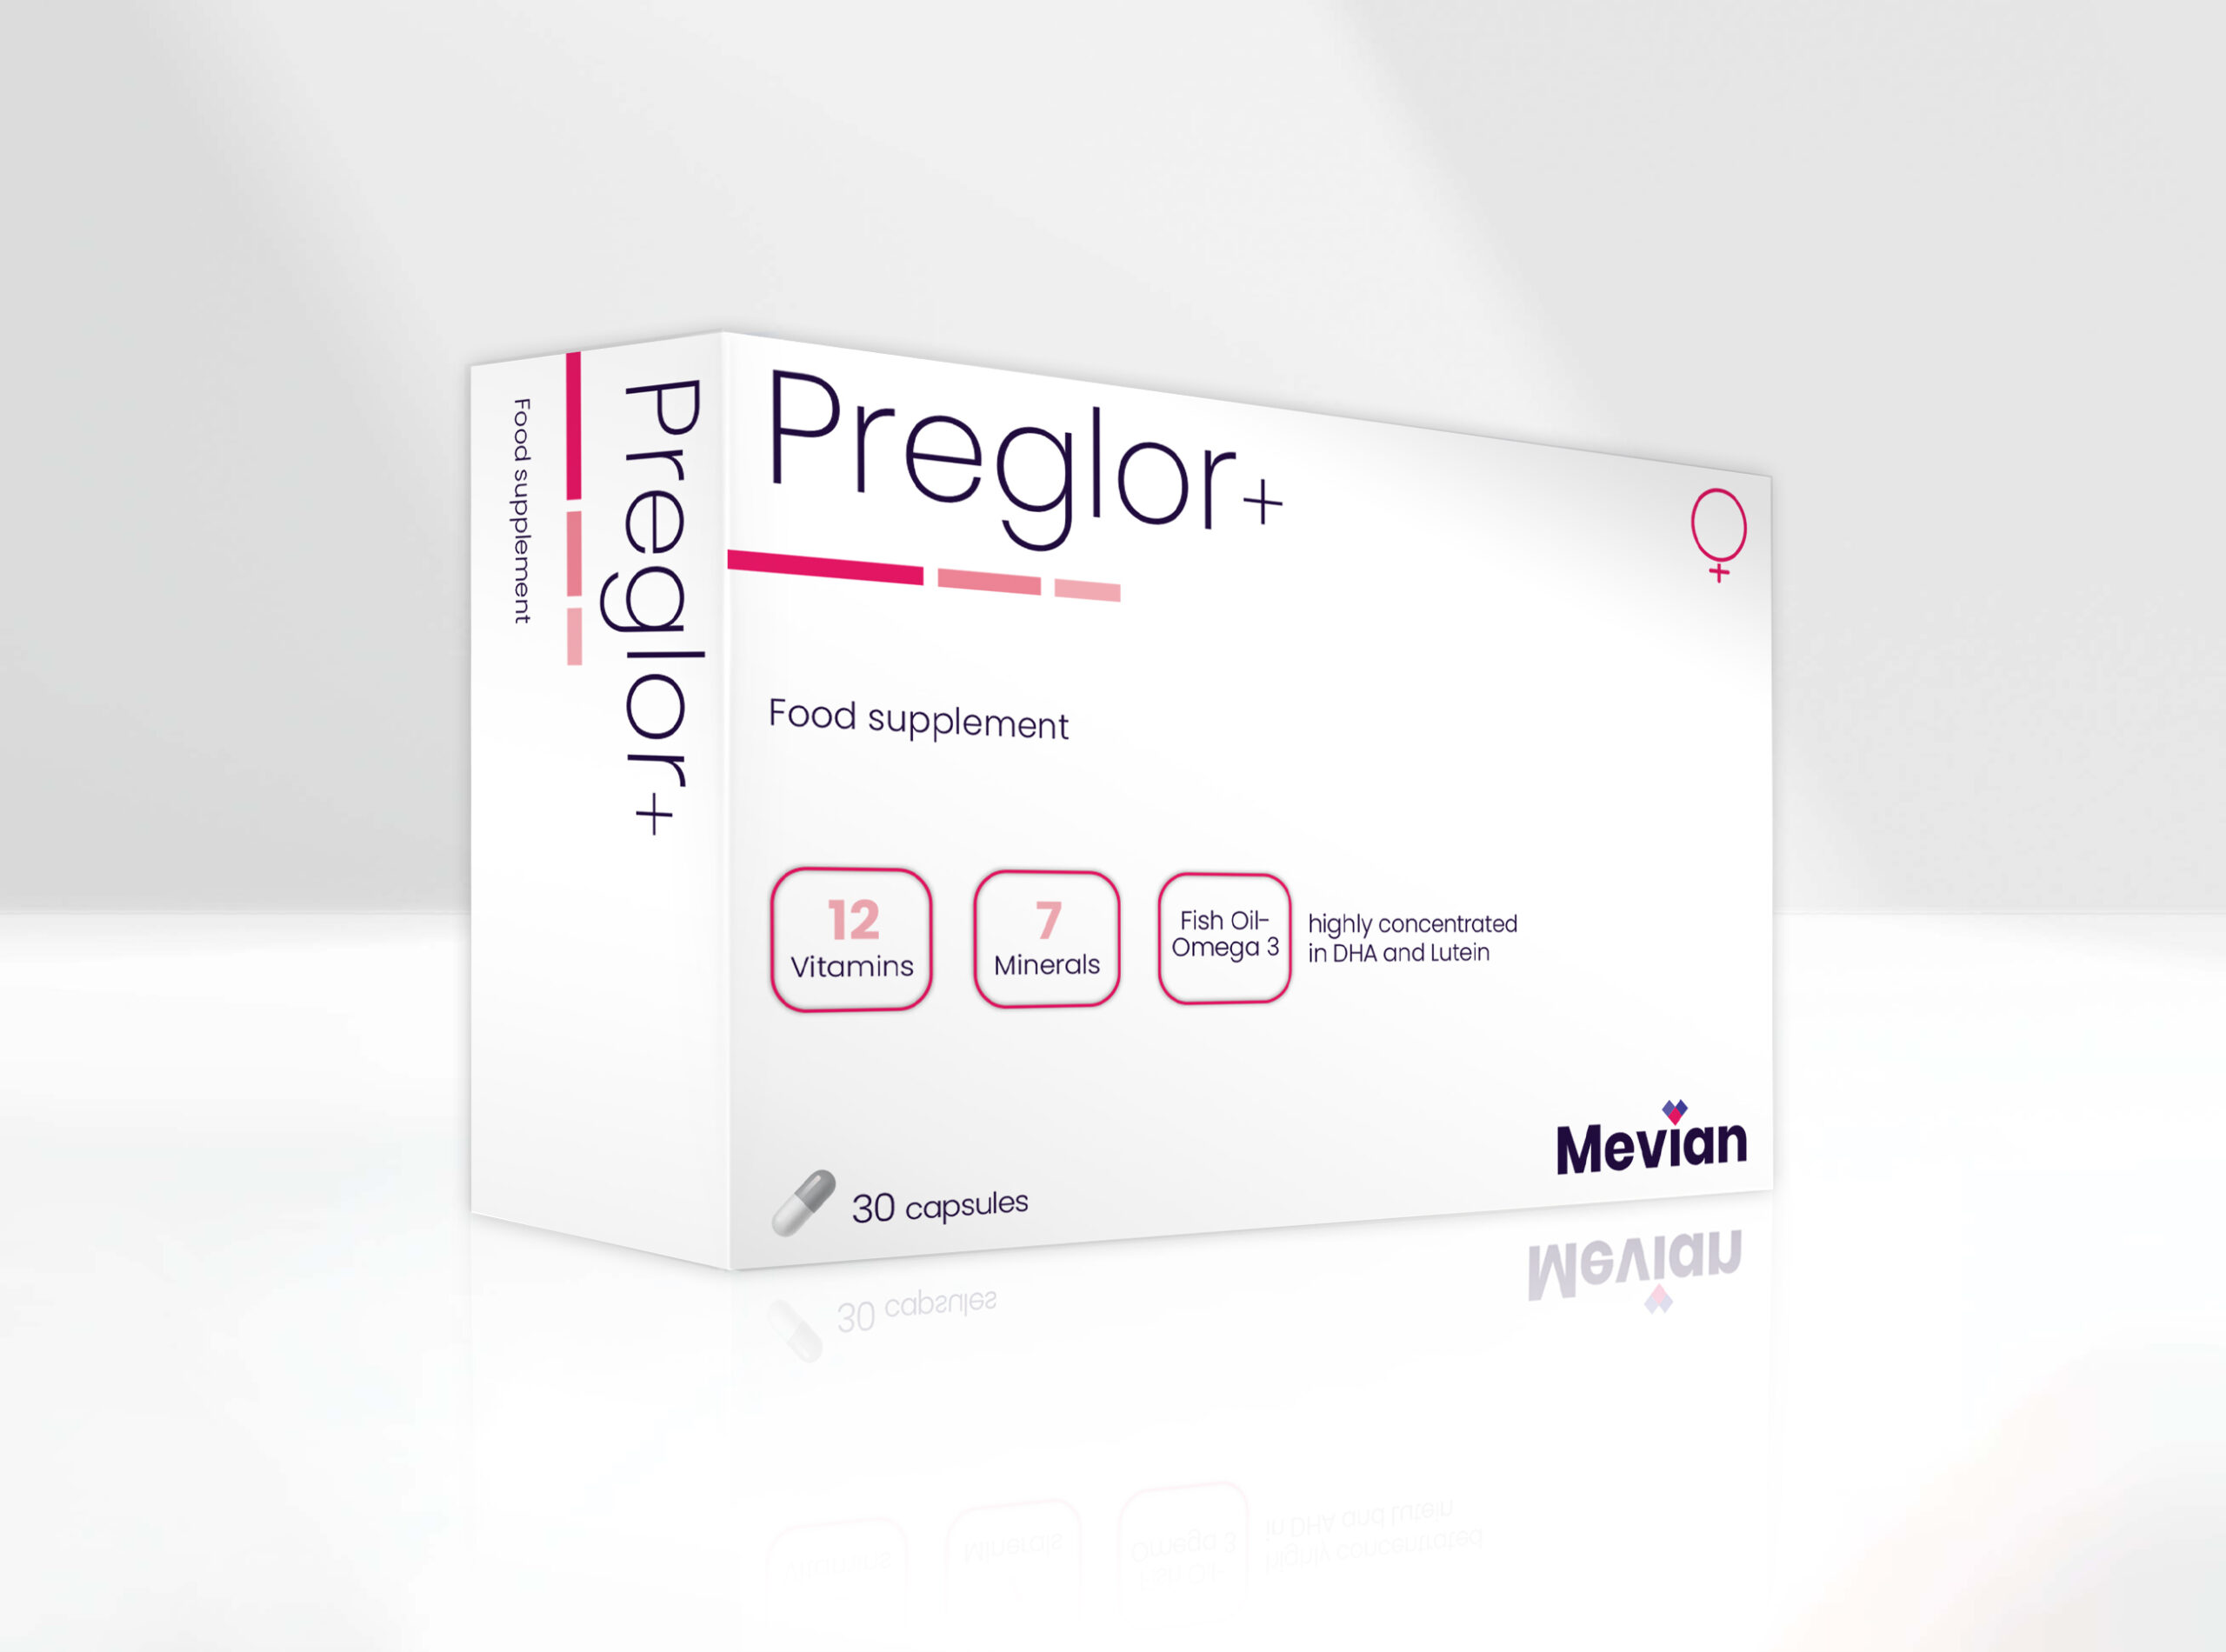 ''Preglor+ is a potent all-in-one vitamin and mineral supplement enhanced with DHA that contributes to the development of the baby's brain helping cell multiplication and division.''